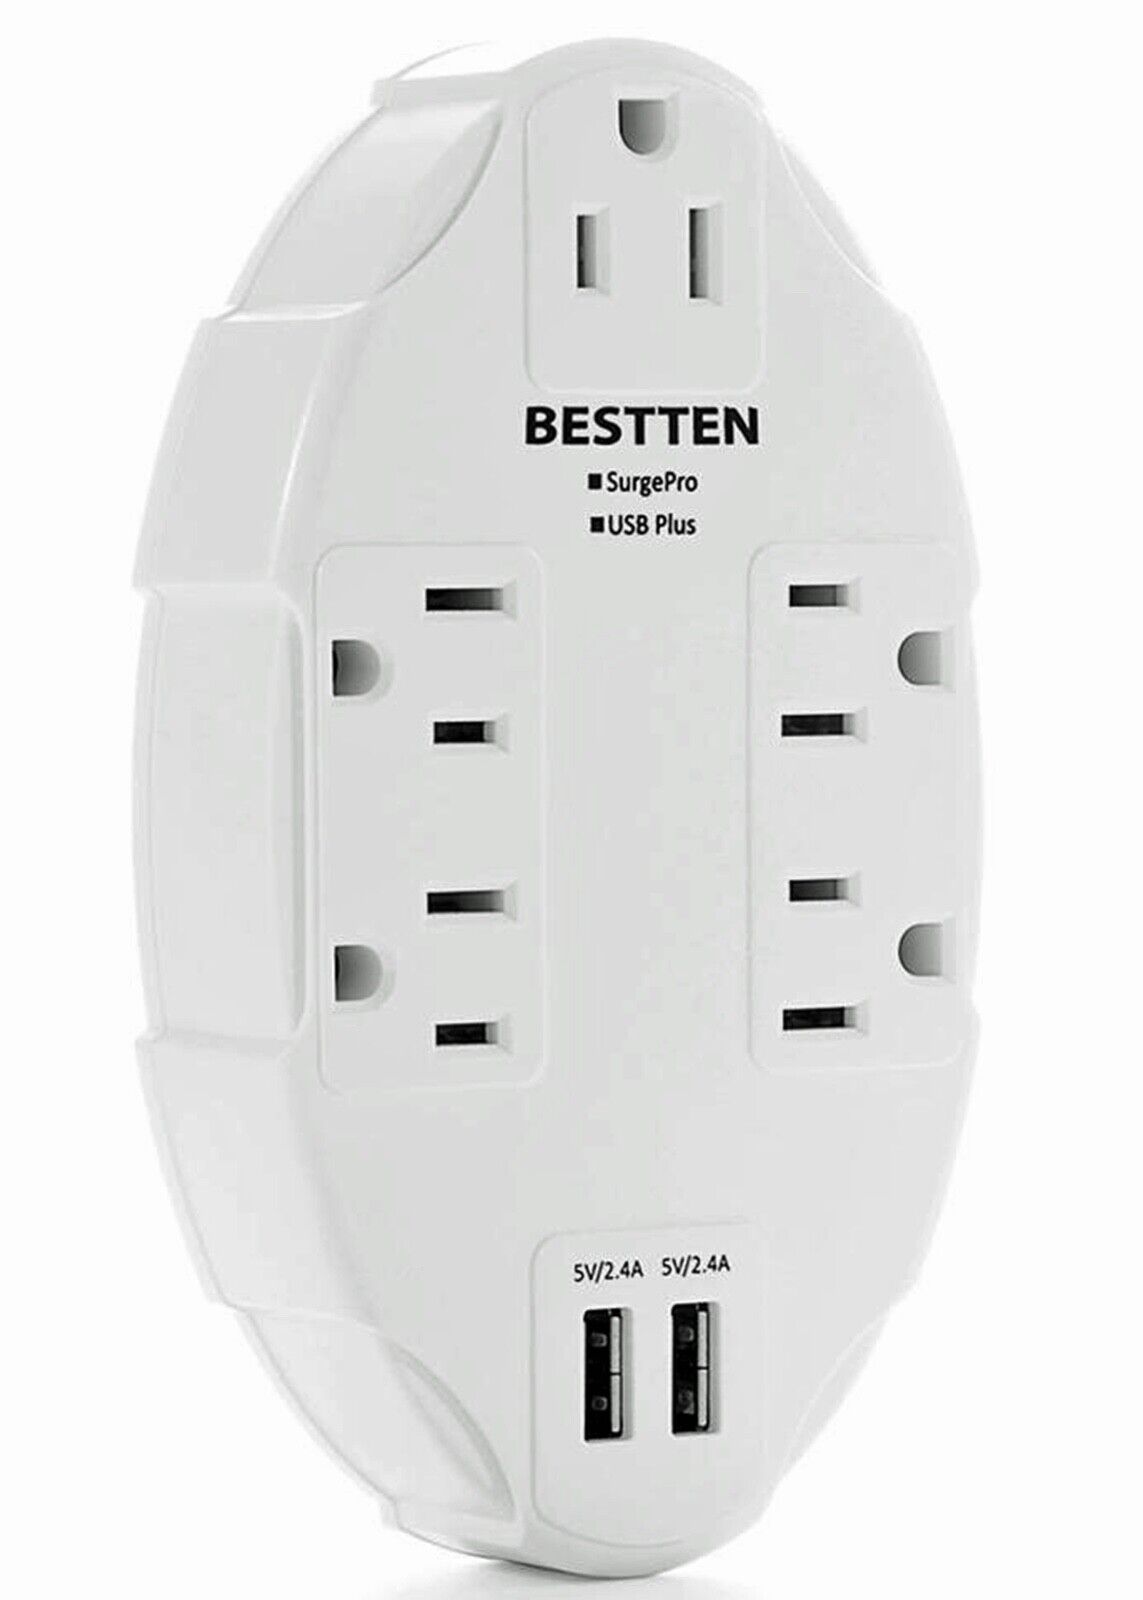 BESTTEN 5-Outlet Wall Surge Protector with 2 USB Fast Charging Ports USW-2U5A-0A